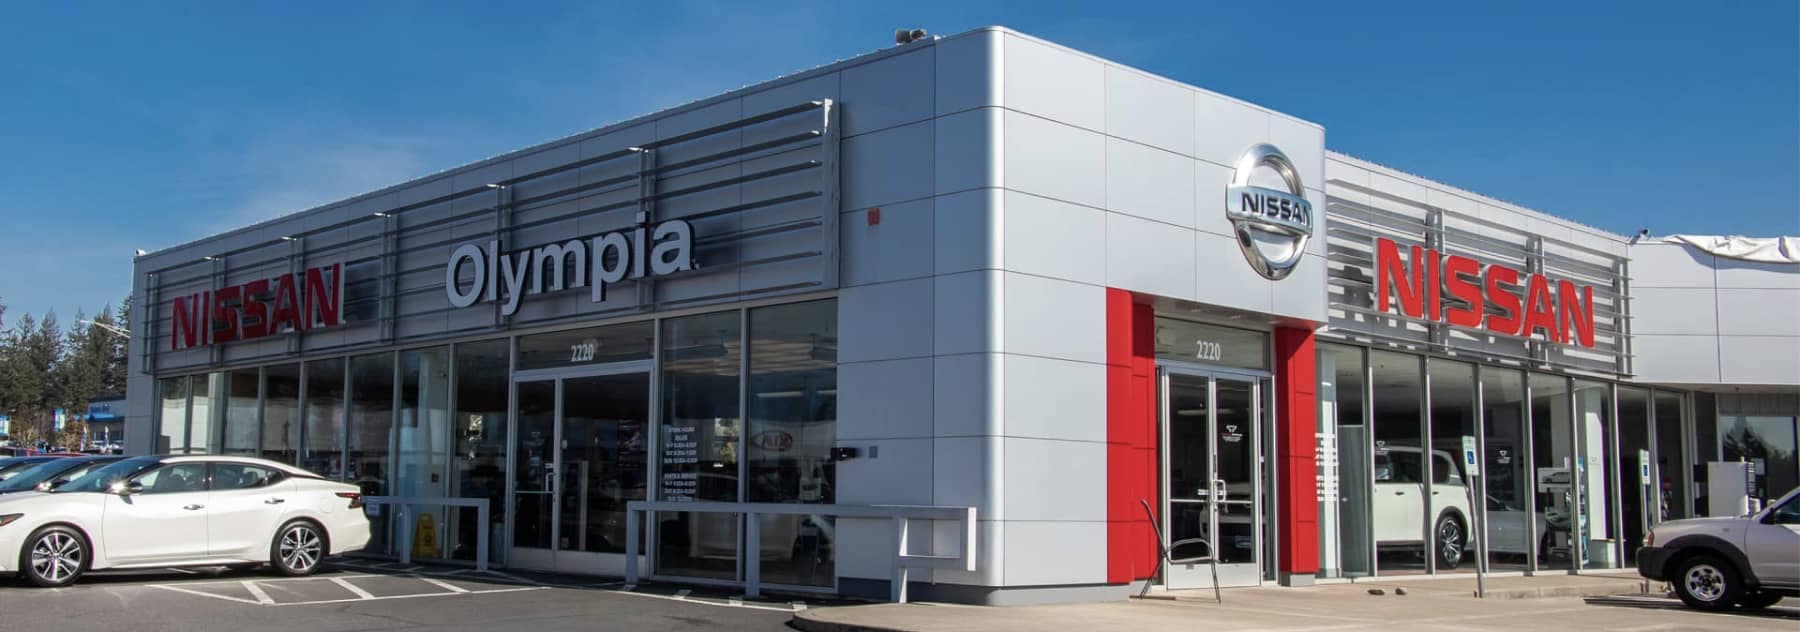 Olympia Nissan Dealership During the day from the outside